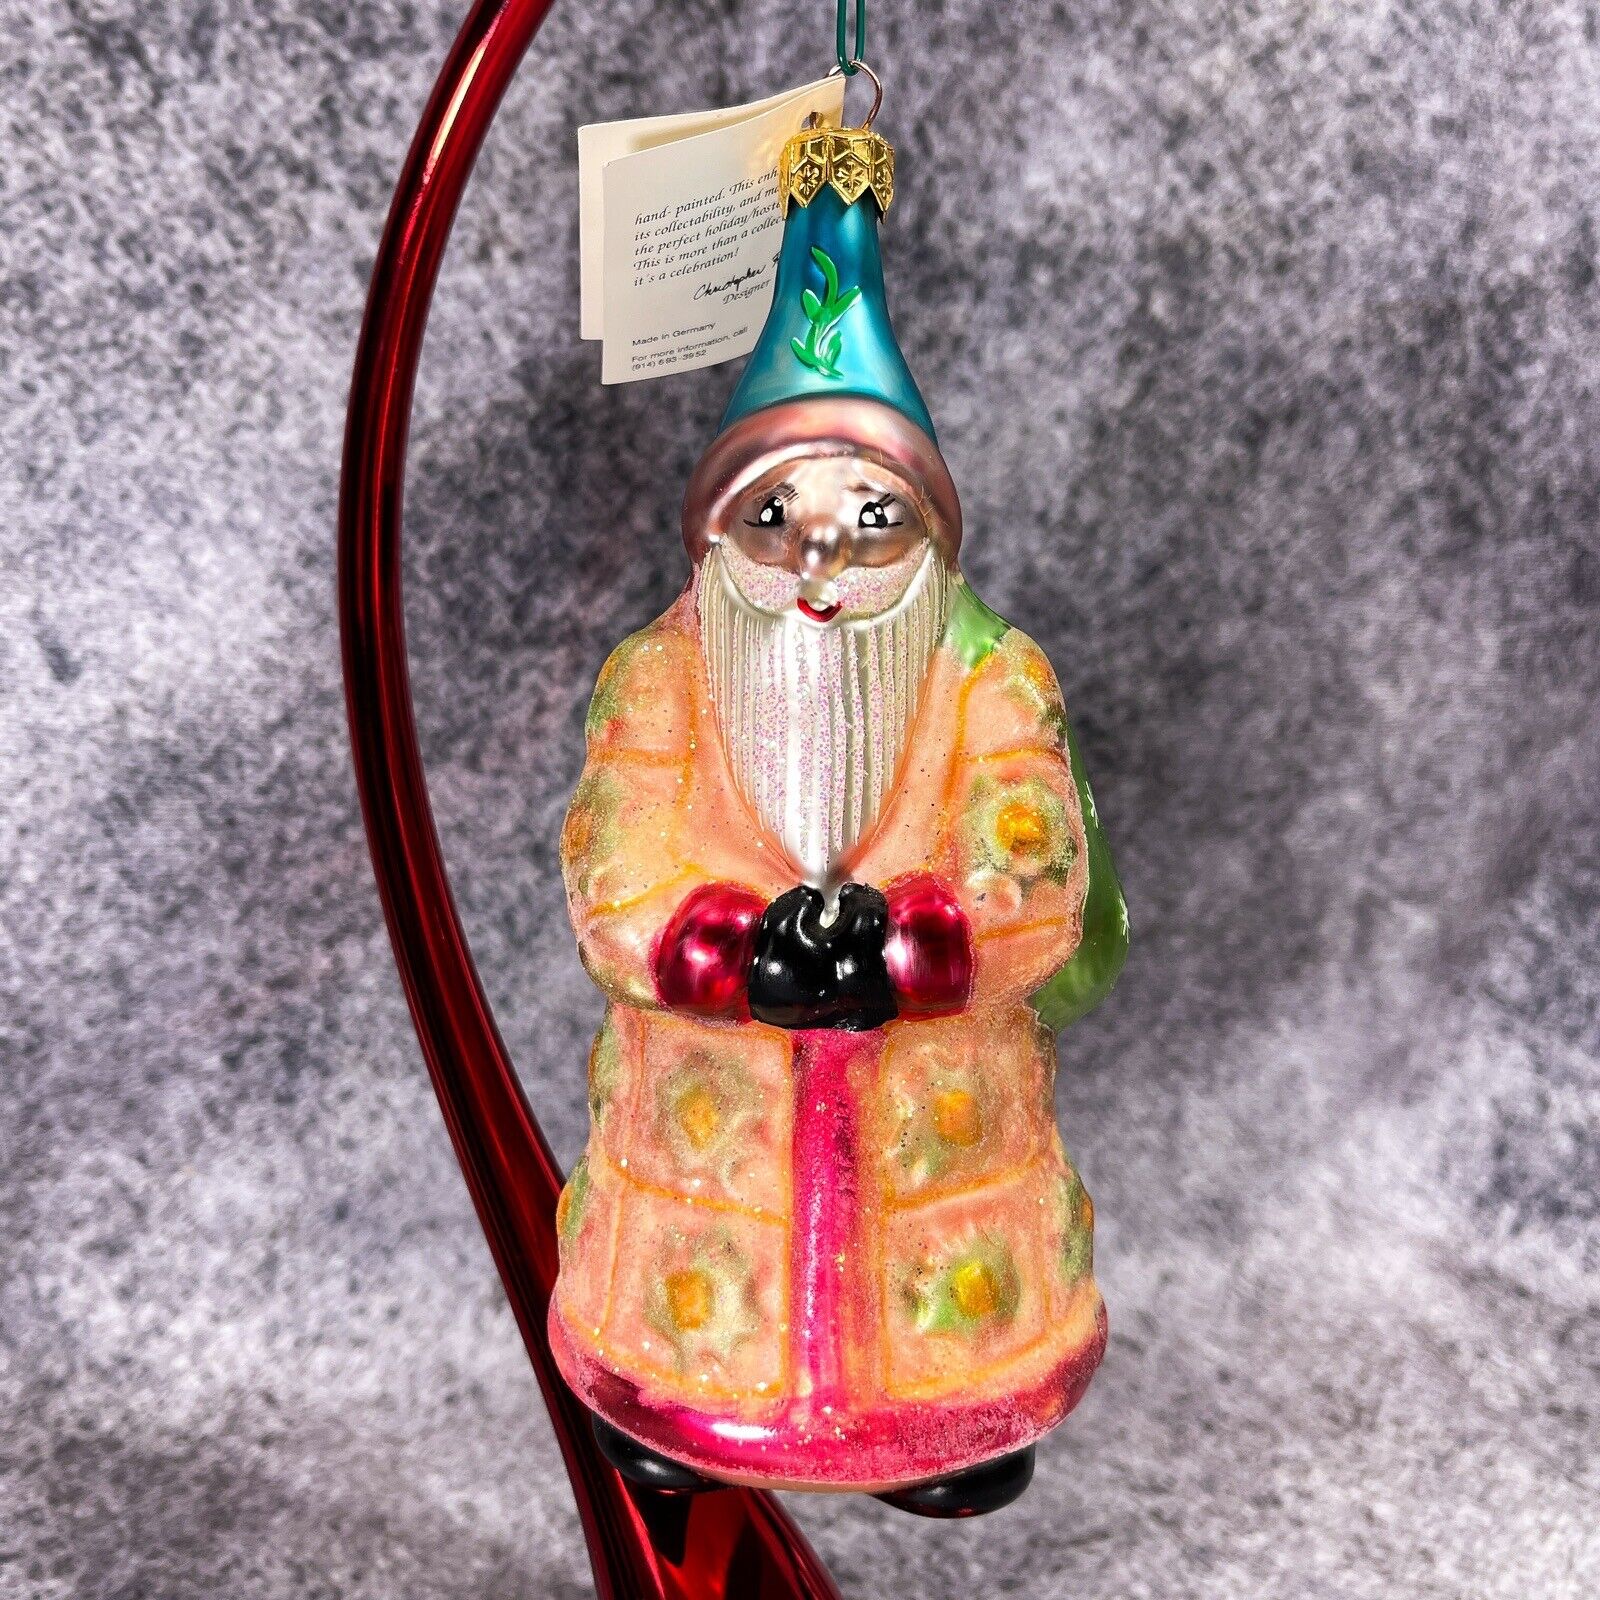 Christopher Radko Rare Color Quilted Santa Claus Glass Christmas Ornament 6”